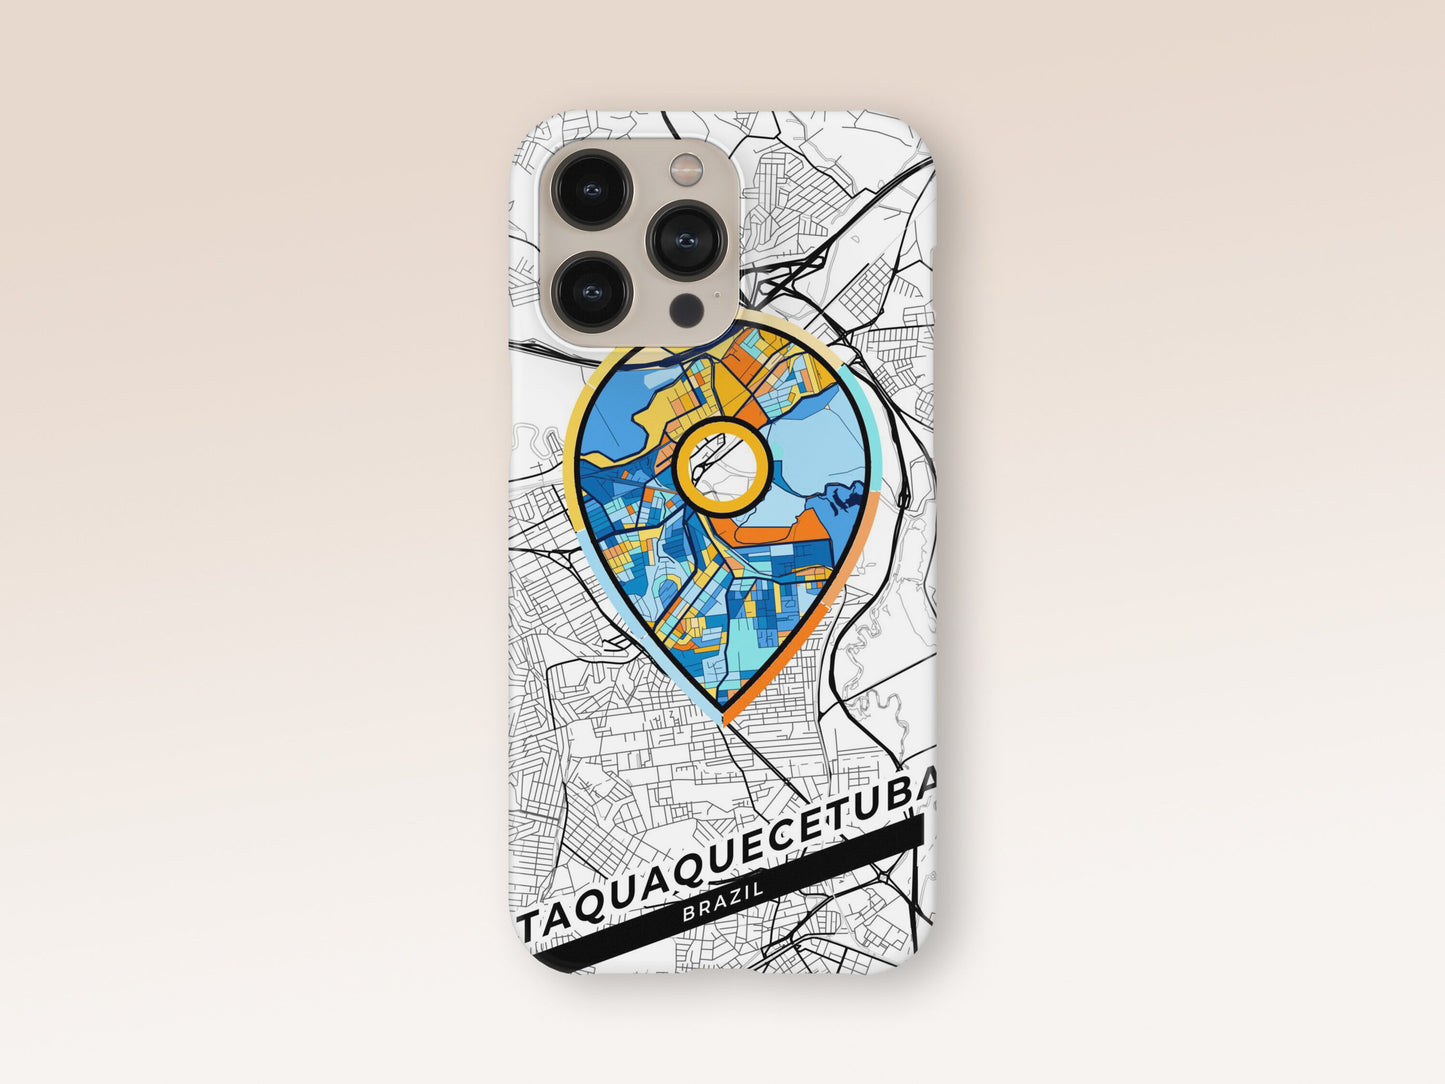 Itaquaquecetuba Brazil slim phone case with colorful icon. Birthday, wedding or housewarming gift. Couple match cases. 1